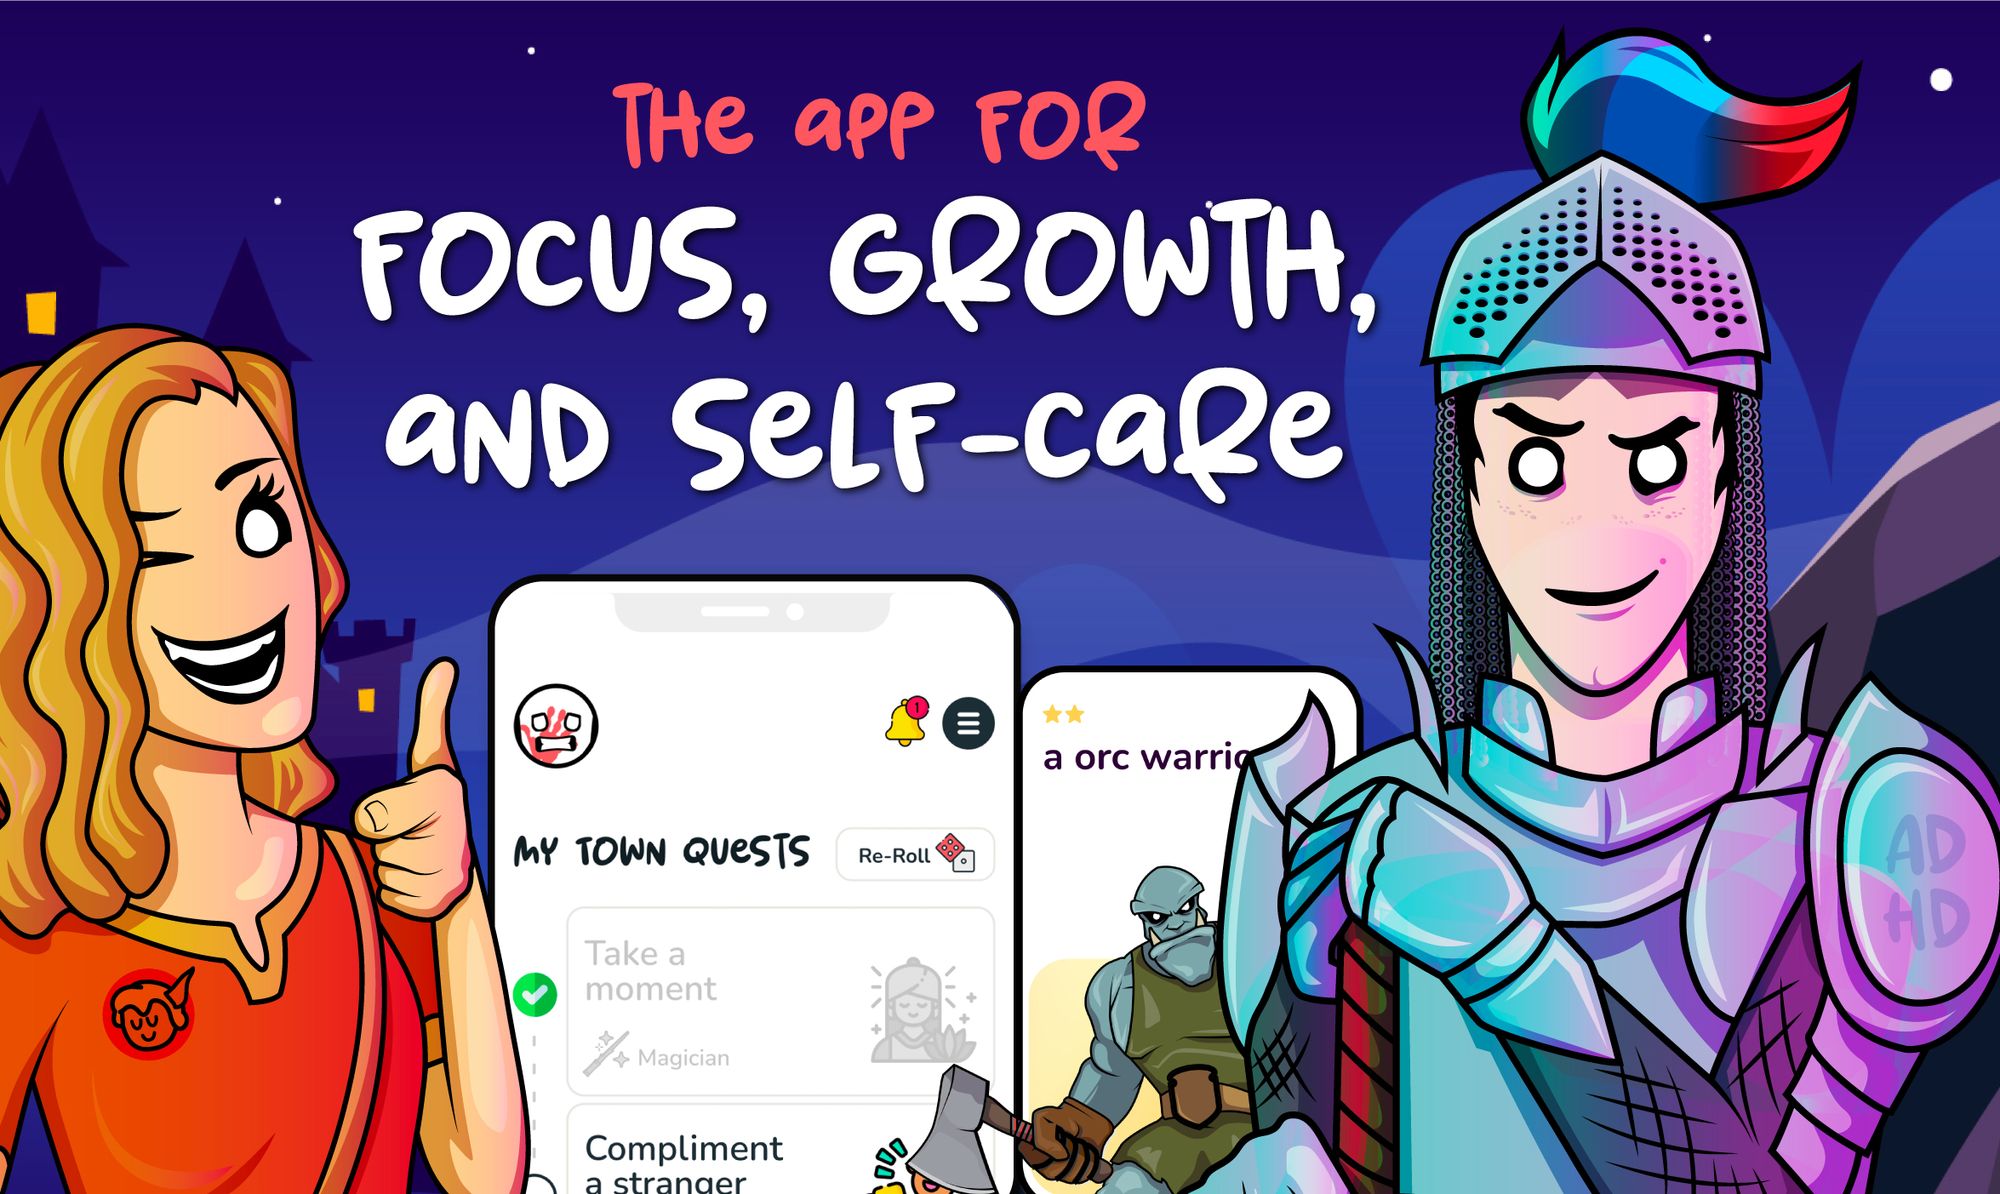 Local app developer gets into self-care and productivity game